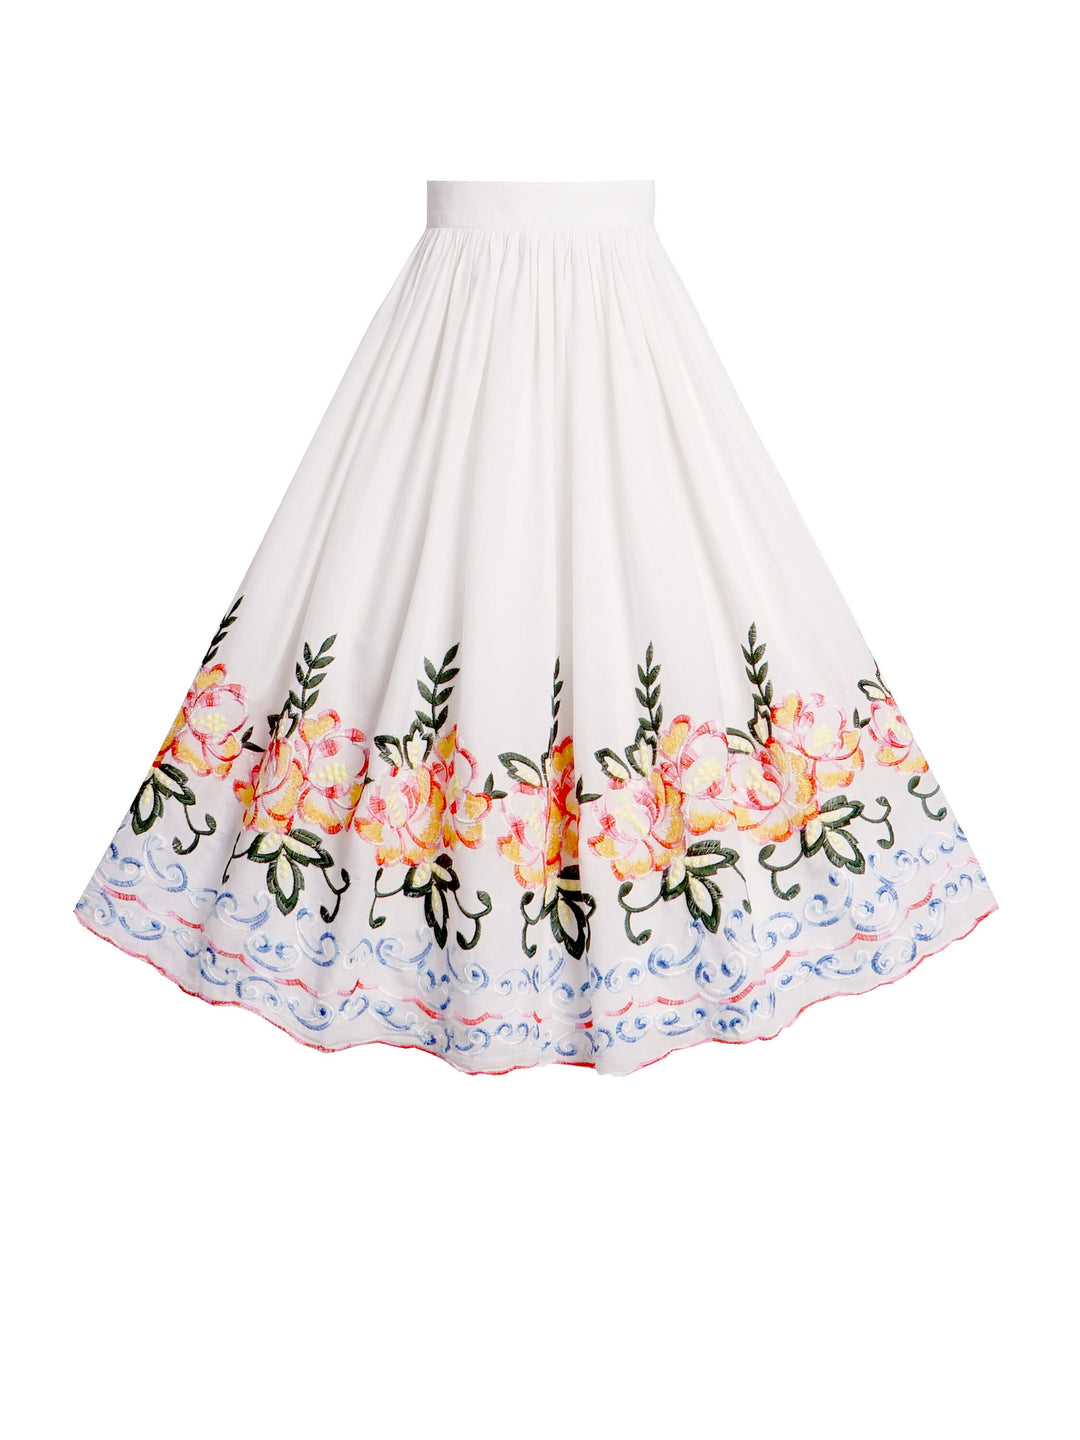 RTS - Size S - Lola Skirt White "Garden of your Dreams" Floral Border Print